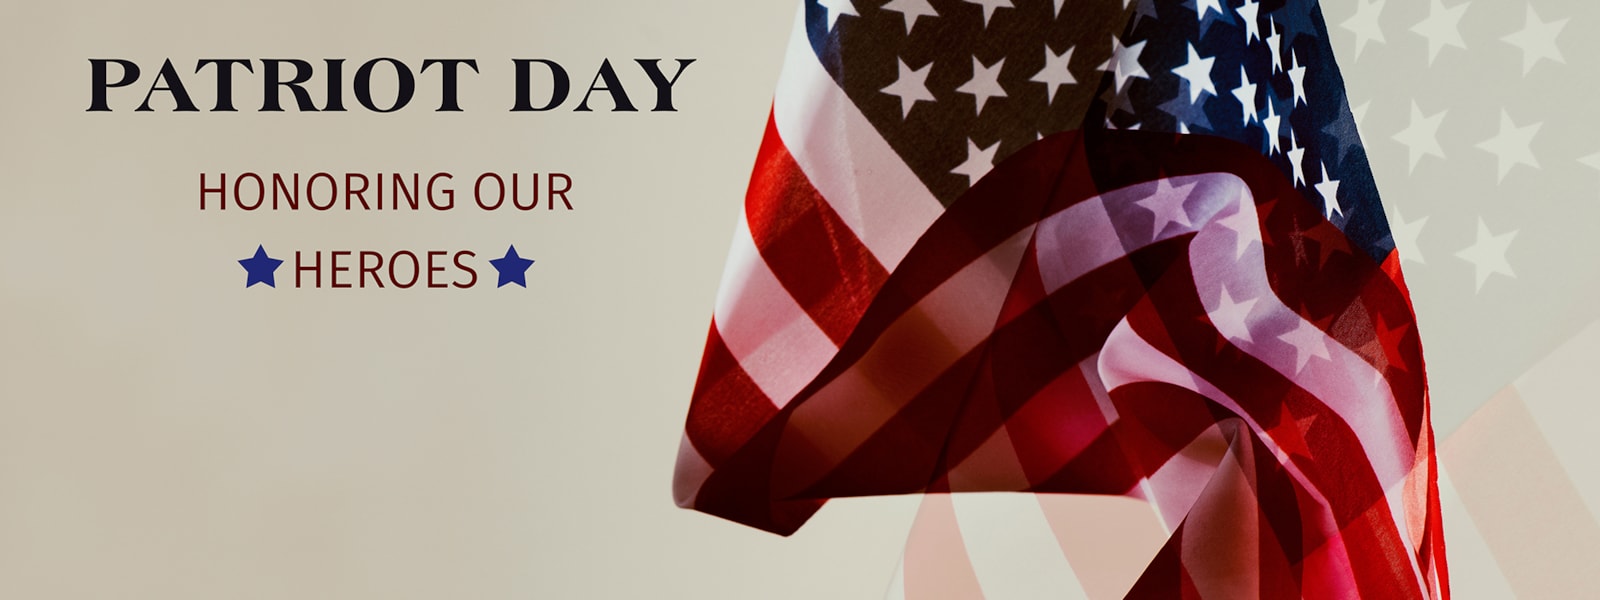 Patriot Day Honoring our Heroes